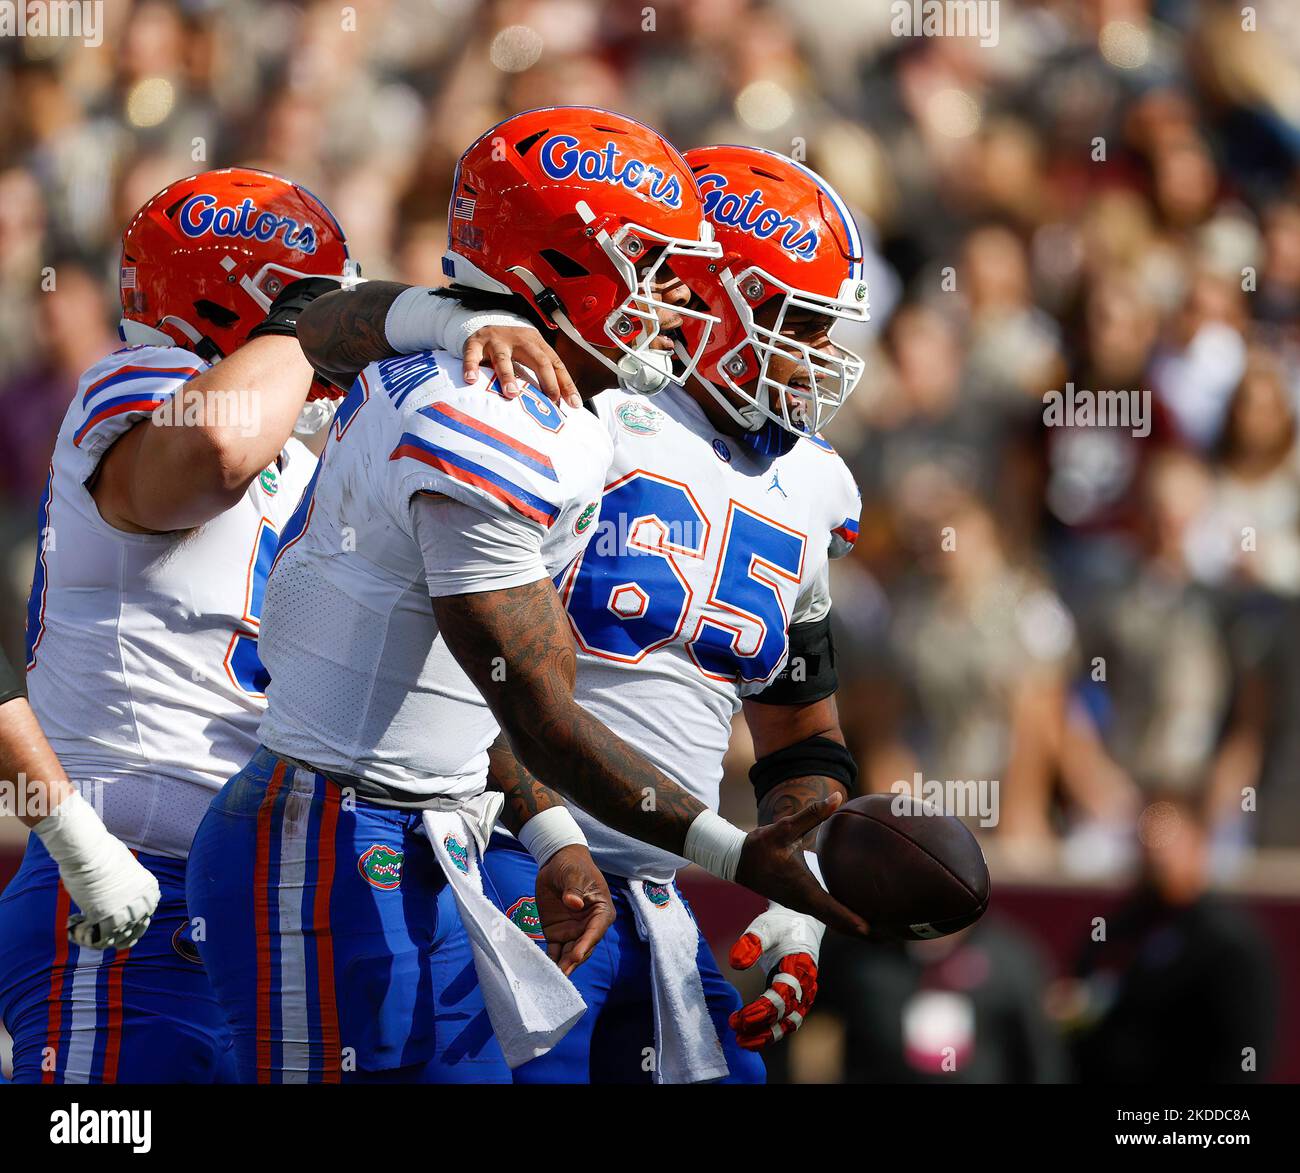 November 5, 2022: The Florida Gators celebrate after a 10-yard touchdown run by quarterback Anthony Richardson (15) during an NCAA college football game between Texas A&M and Florida on Nov. 5, 2022 in College Station. Florida won 41-24. (Credit Image: © Scott Coleman/ZUMA Press Wire) Stock Photo